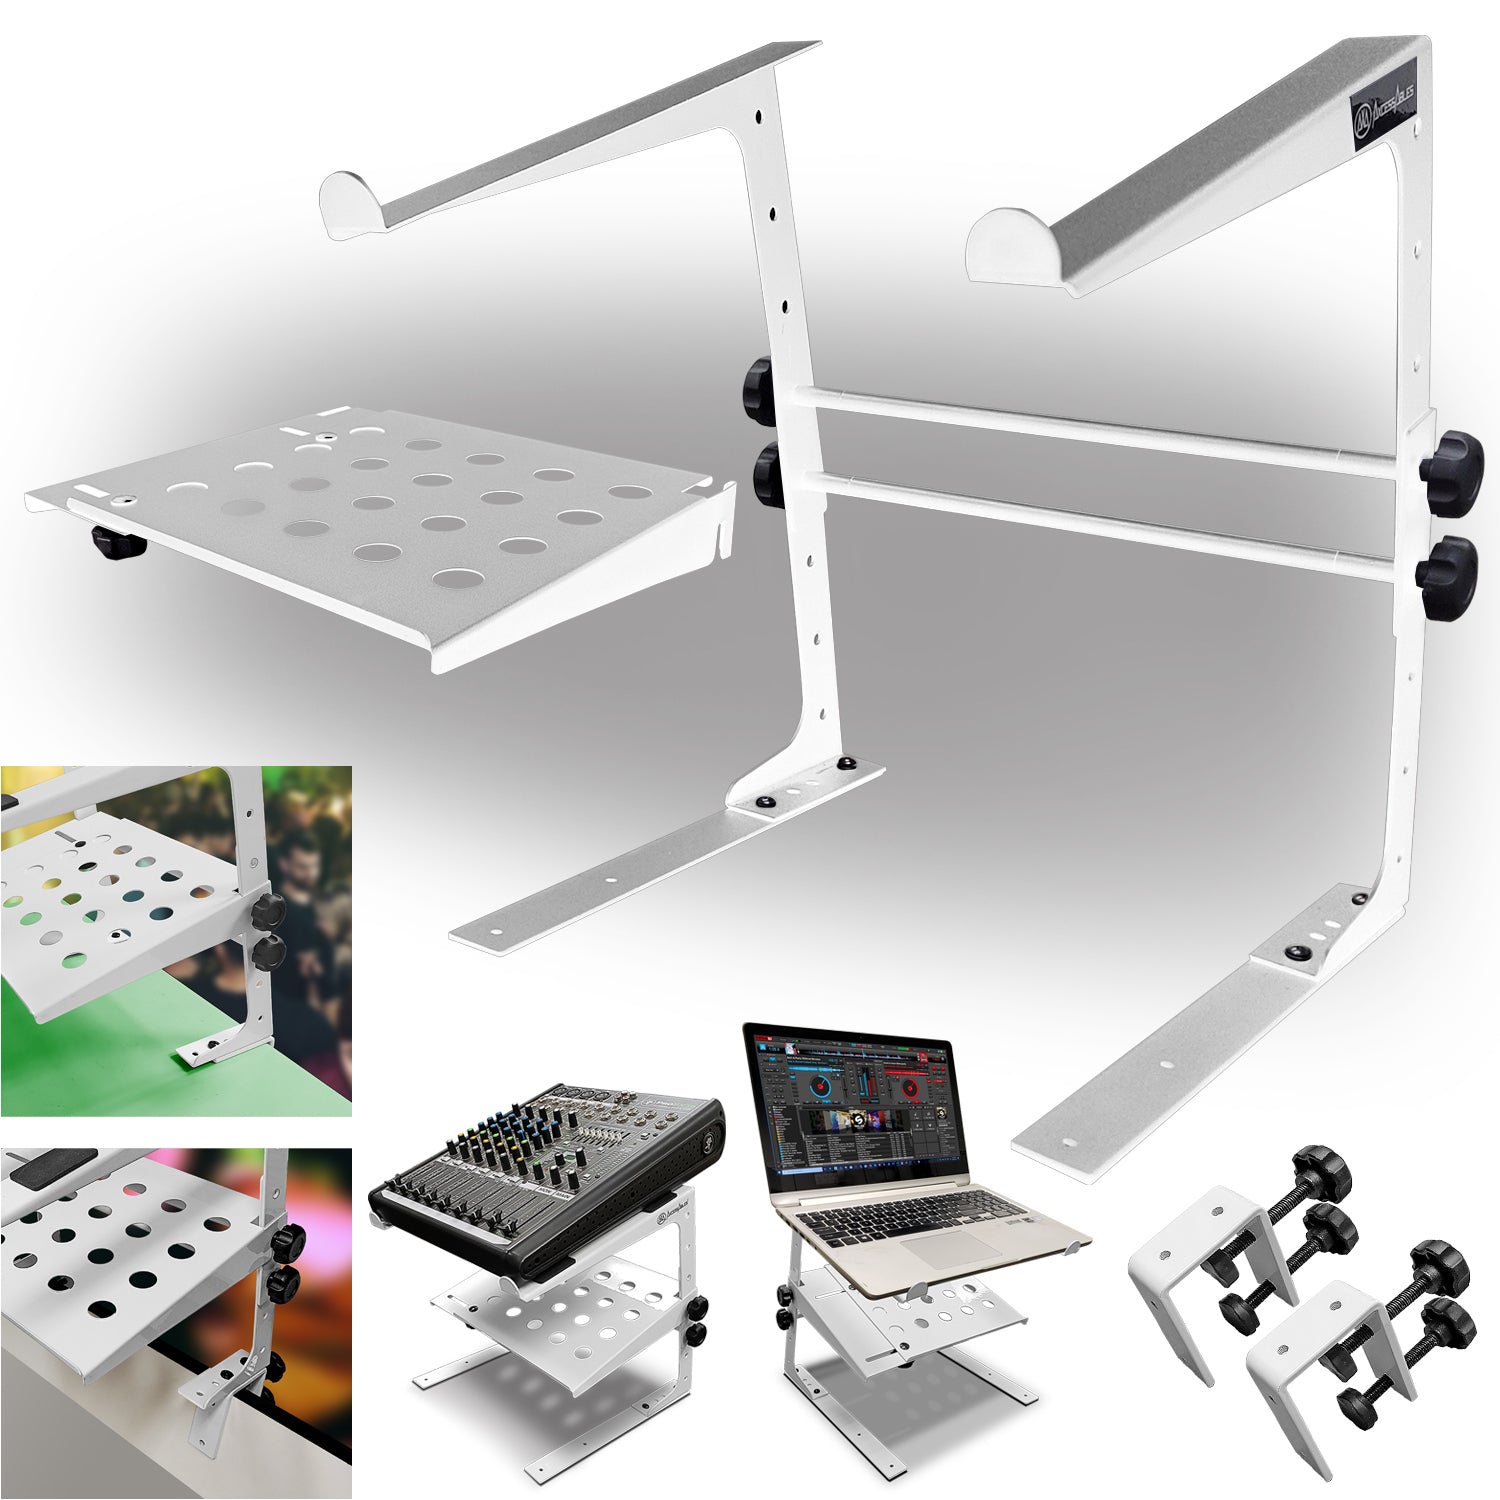 AxcessAbles Two-Tier Adjustable DJ Stand with Clamps | for DJ Controllers and Laptops up to 20lbs.| DJ Controller Stand Compatible with DDJ-REV1, DDJ-FLX4, Party Mix | DJ Laptop Stand (LTS-03 White)